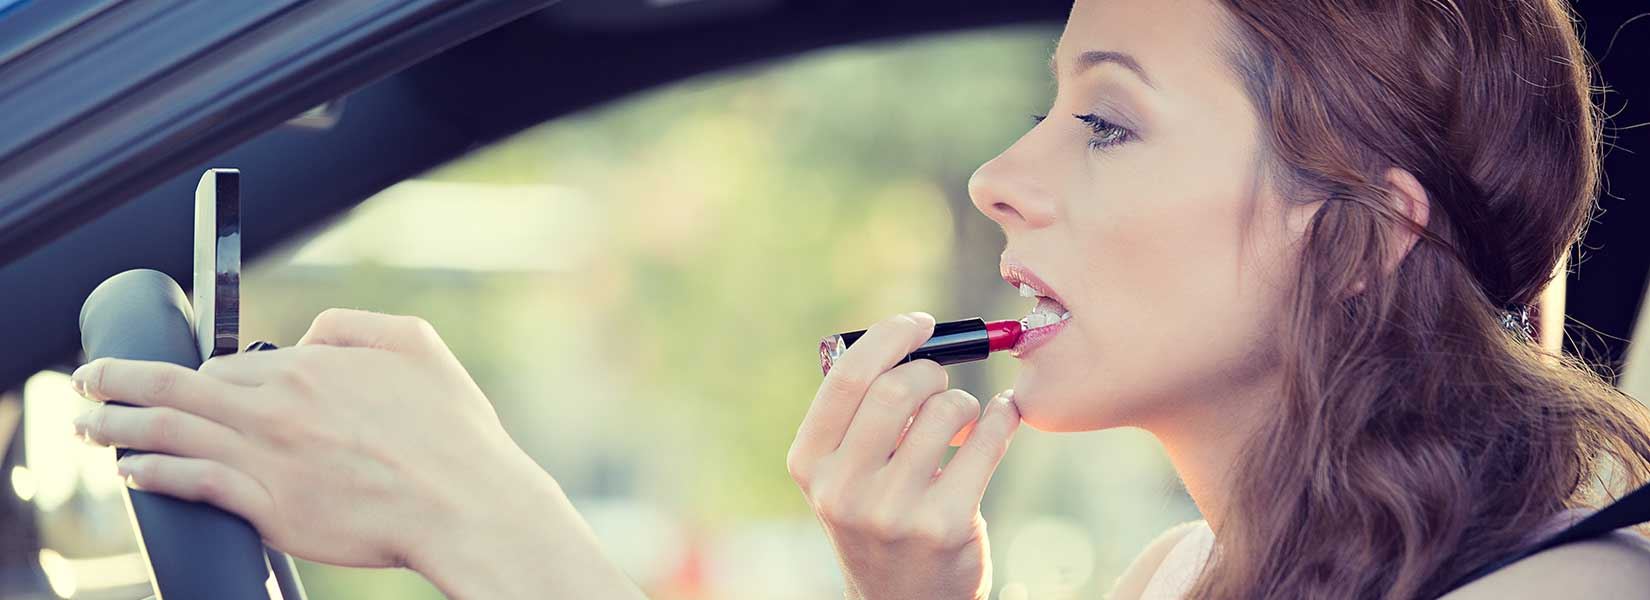 Woman putting on lipstick while driving a car